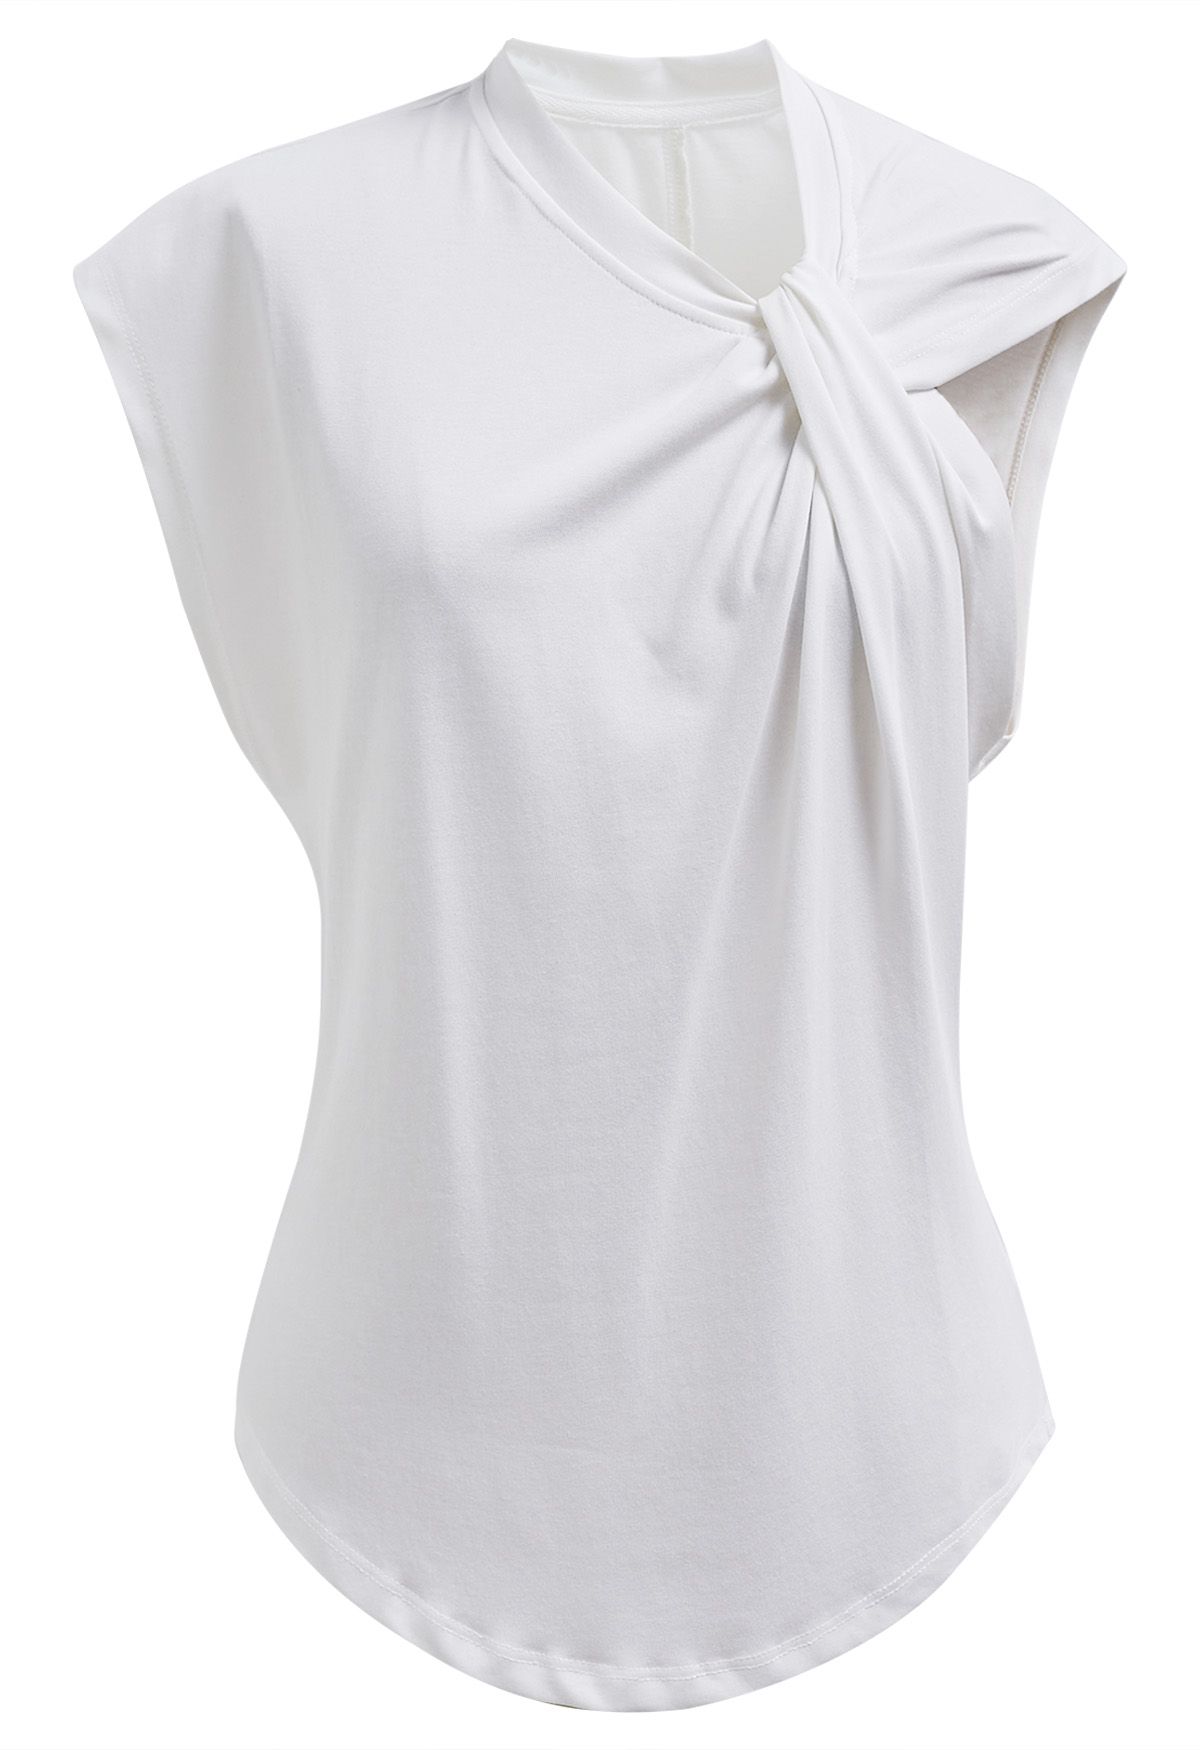 Sweetie Knot Sleeveless Top in White